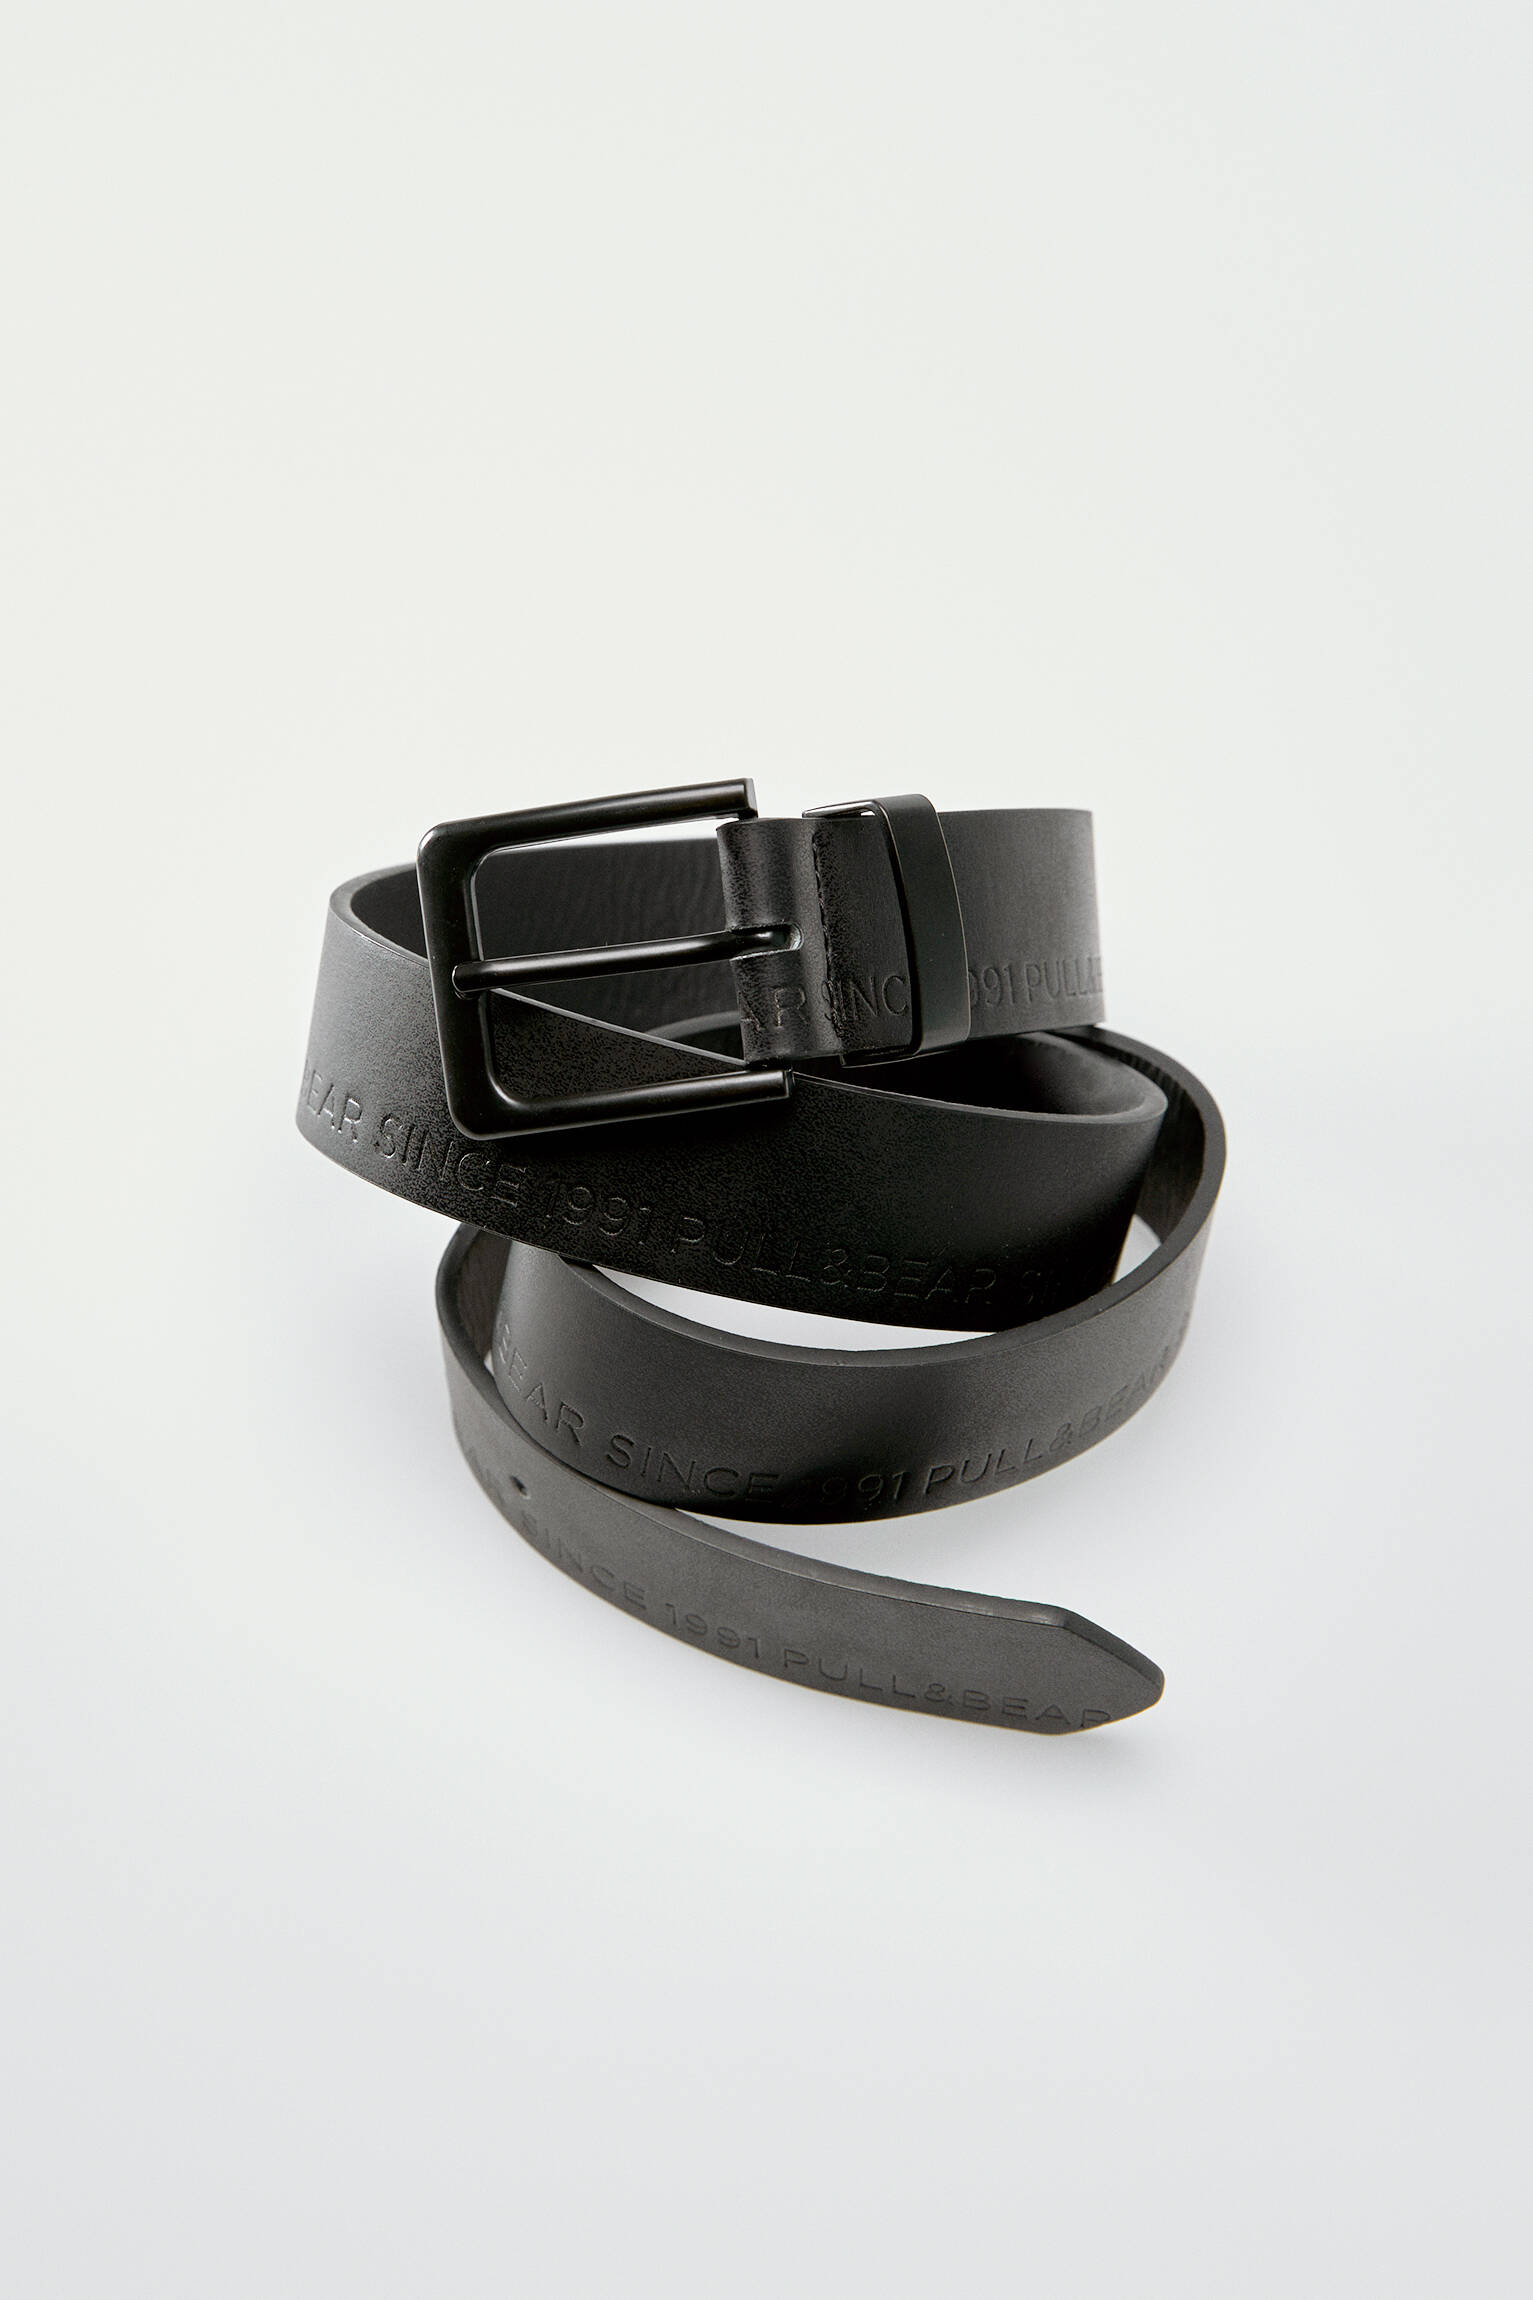 Pull&Bear Women's Faux Leather Belt with Buckle